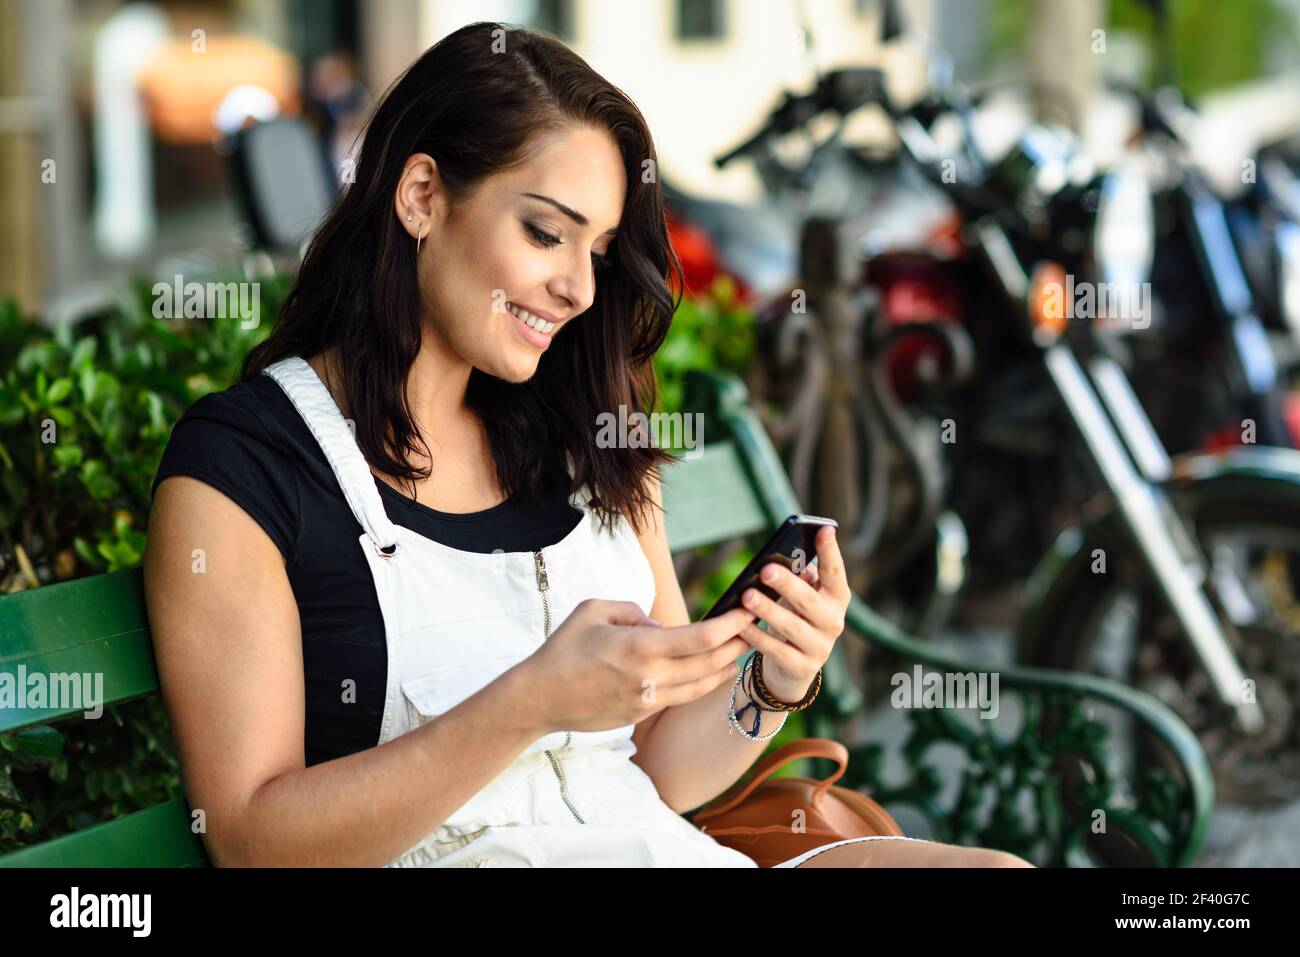 Smiling young woman looking at smart phone outdoors. Girl wearing white denim dress sitting in urban bench. Technology concept. Stock Photo